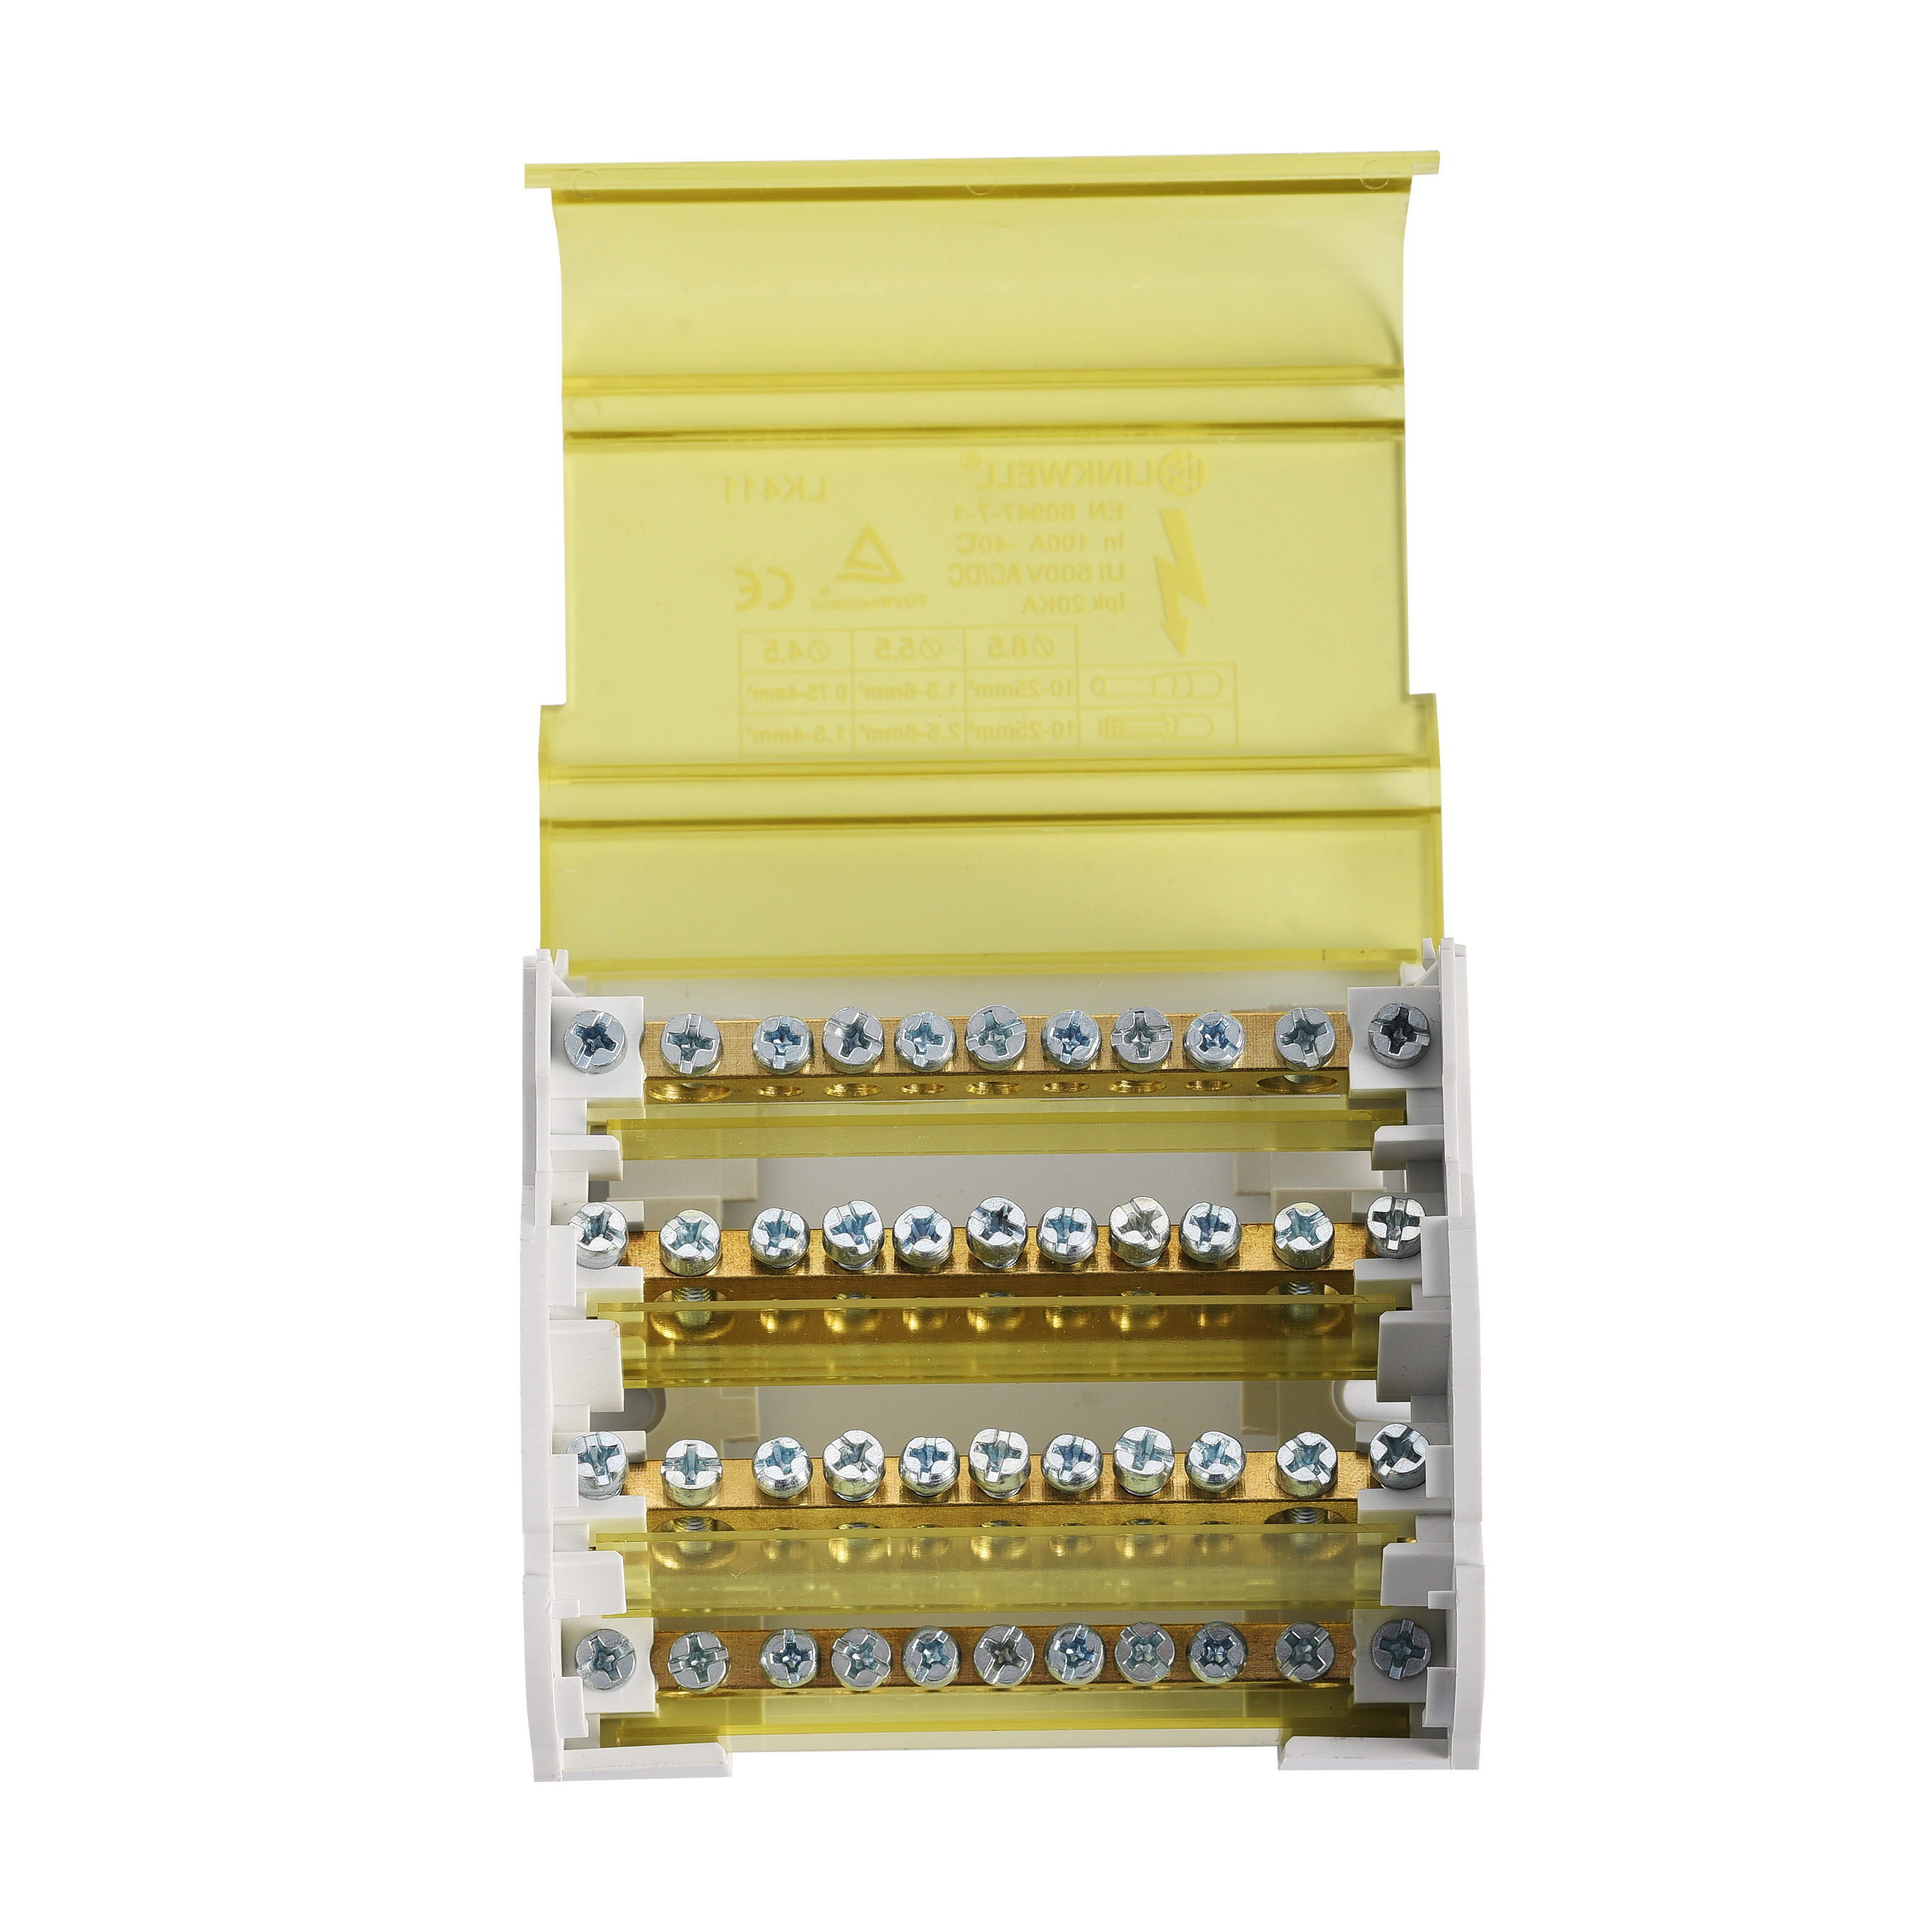 One-in-multiple-out UL94 cabinet terminal block junction box